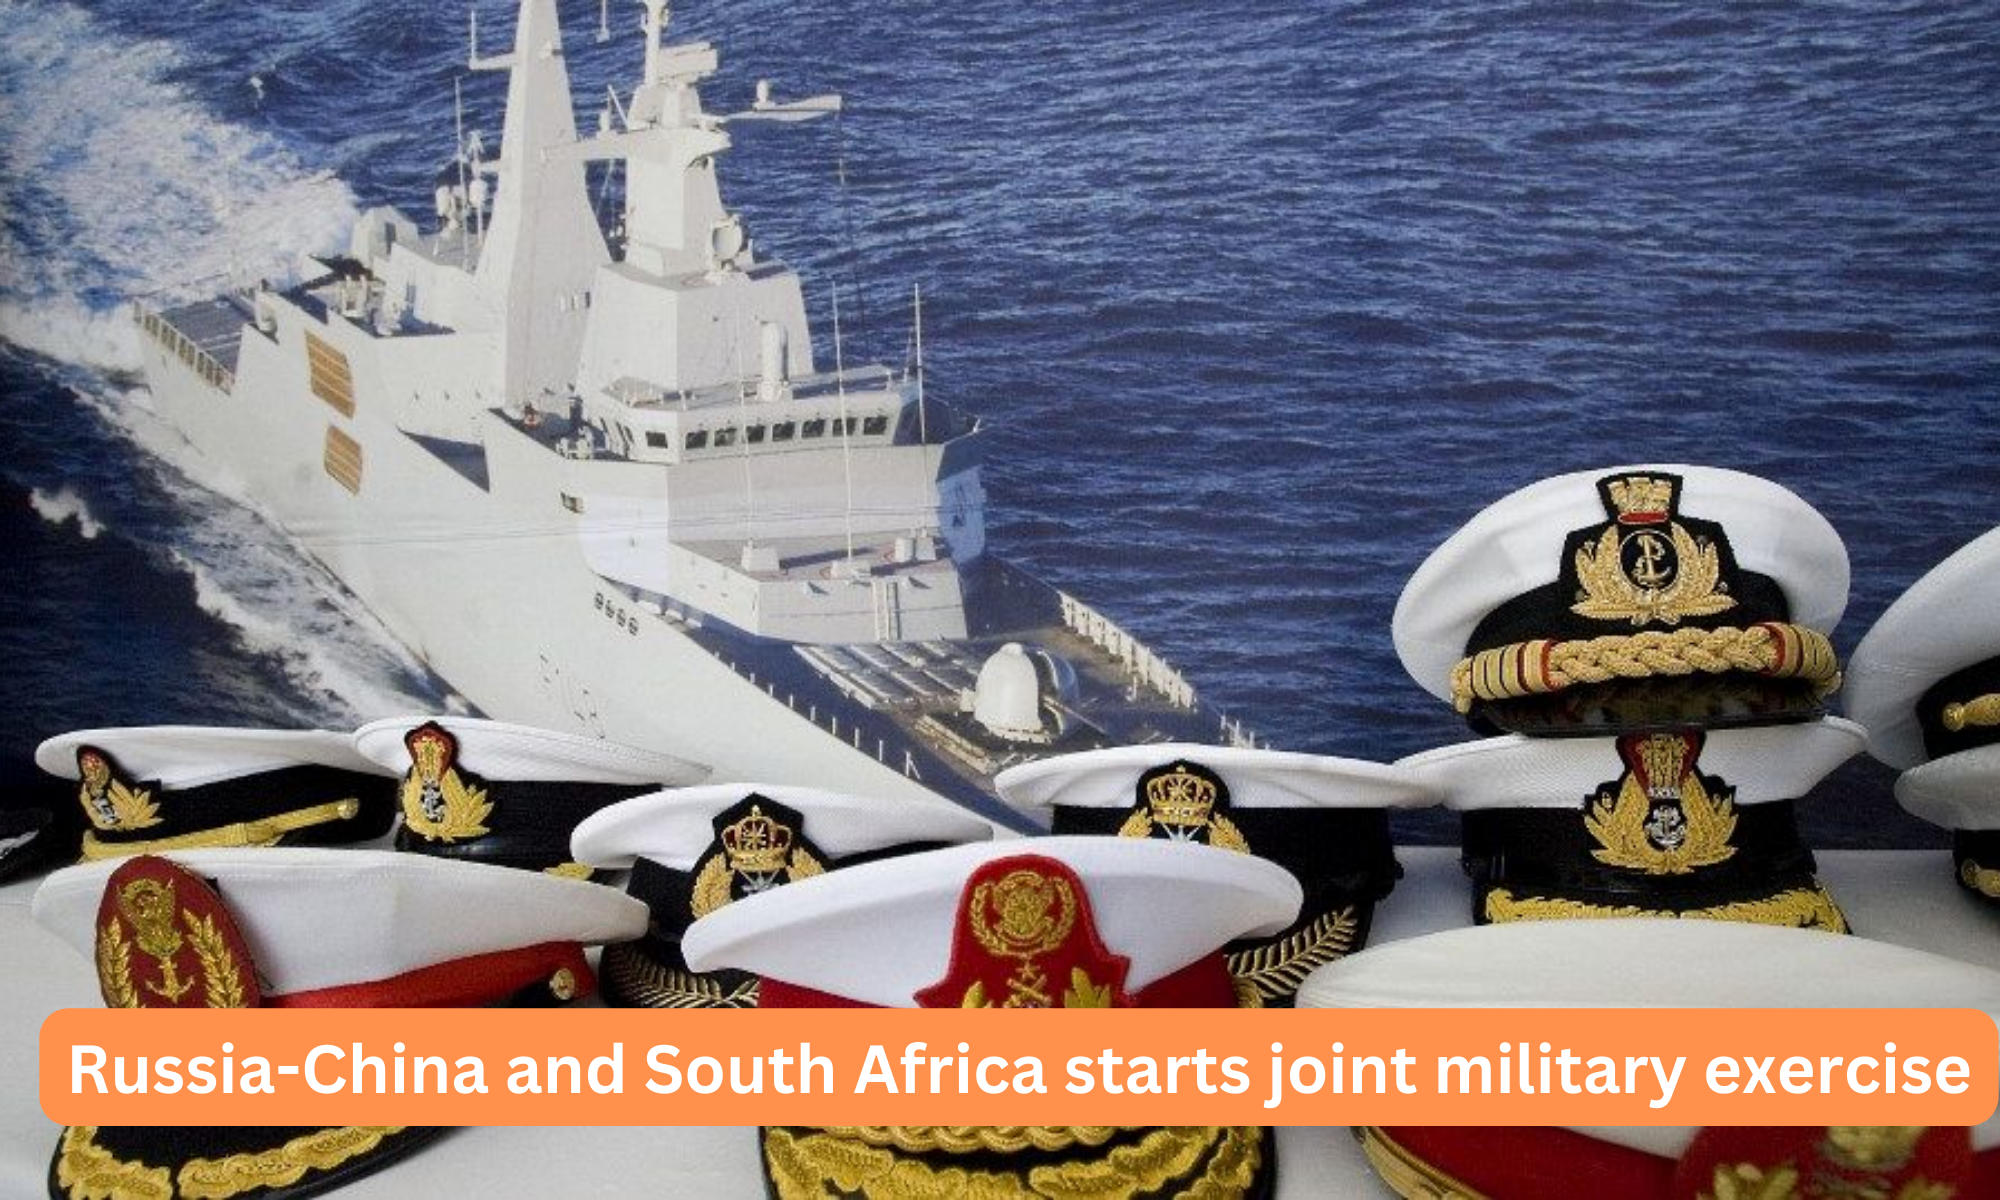 Russia-China and South Africa starts joint military exercise